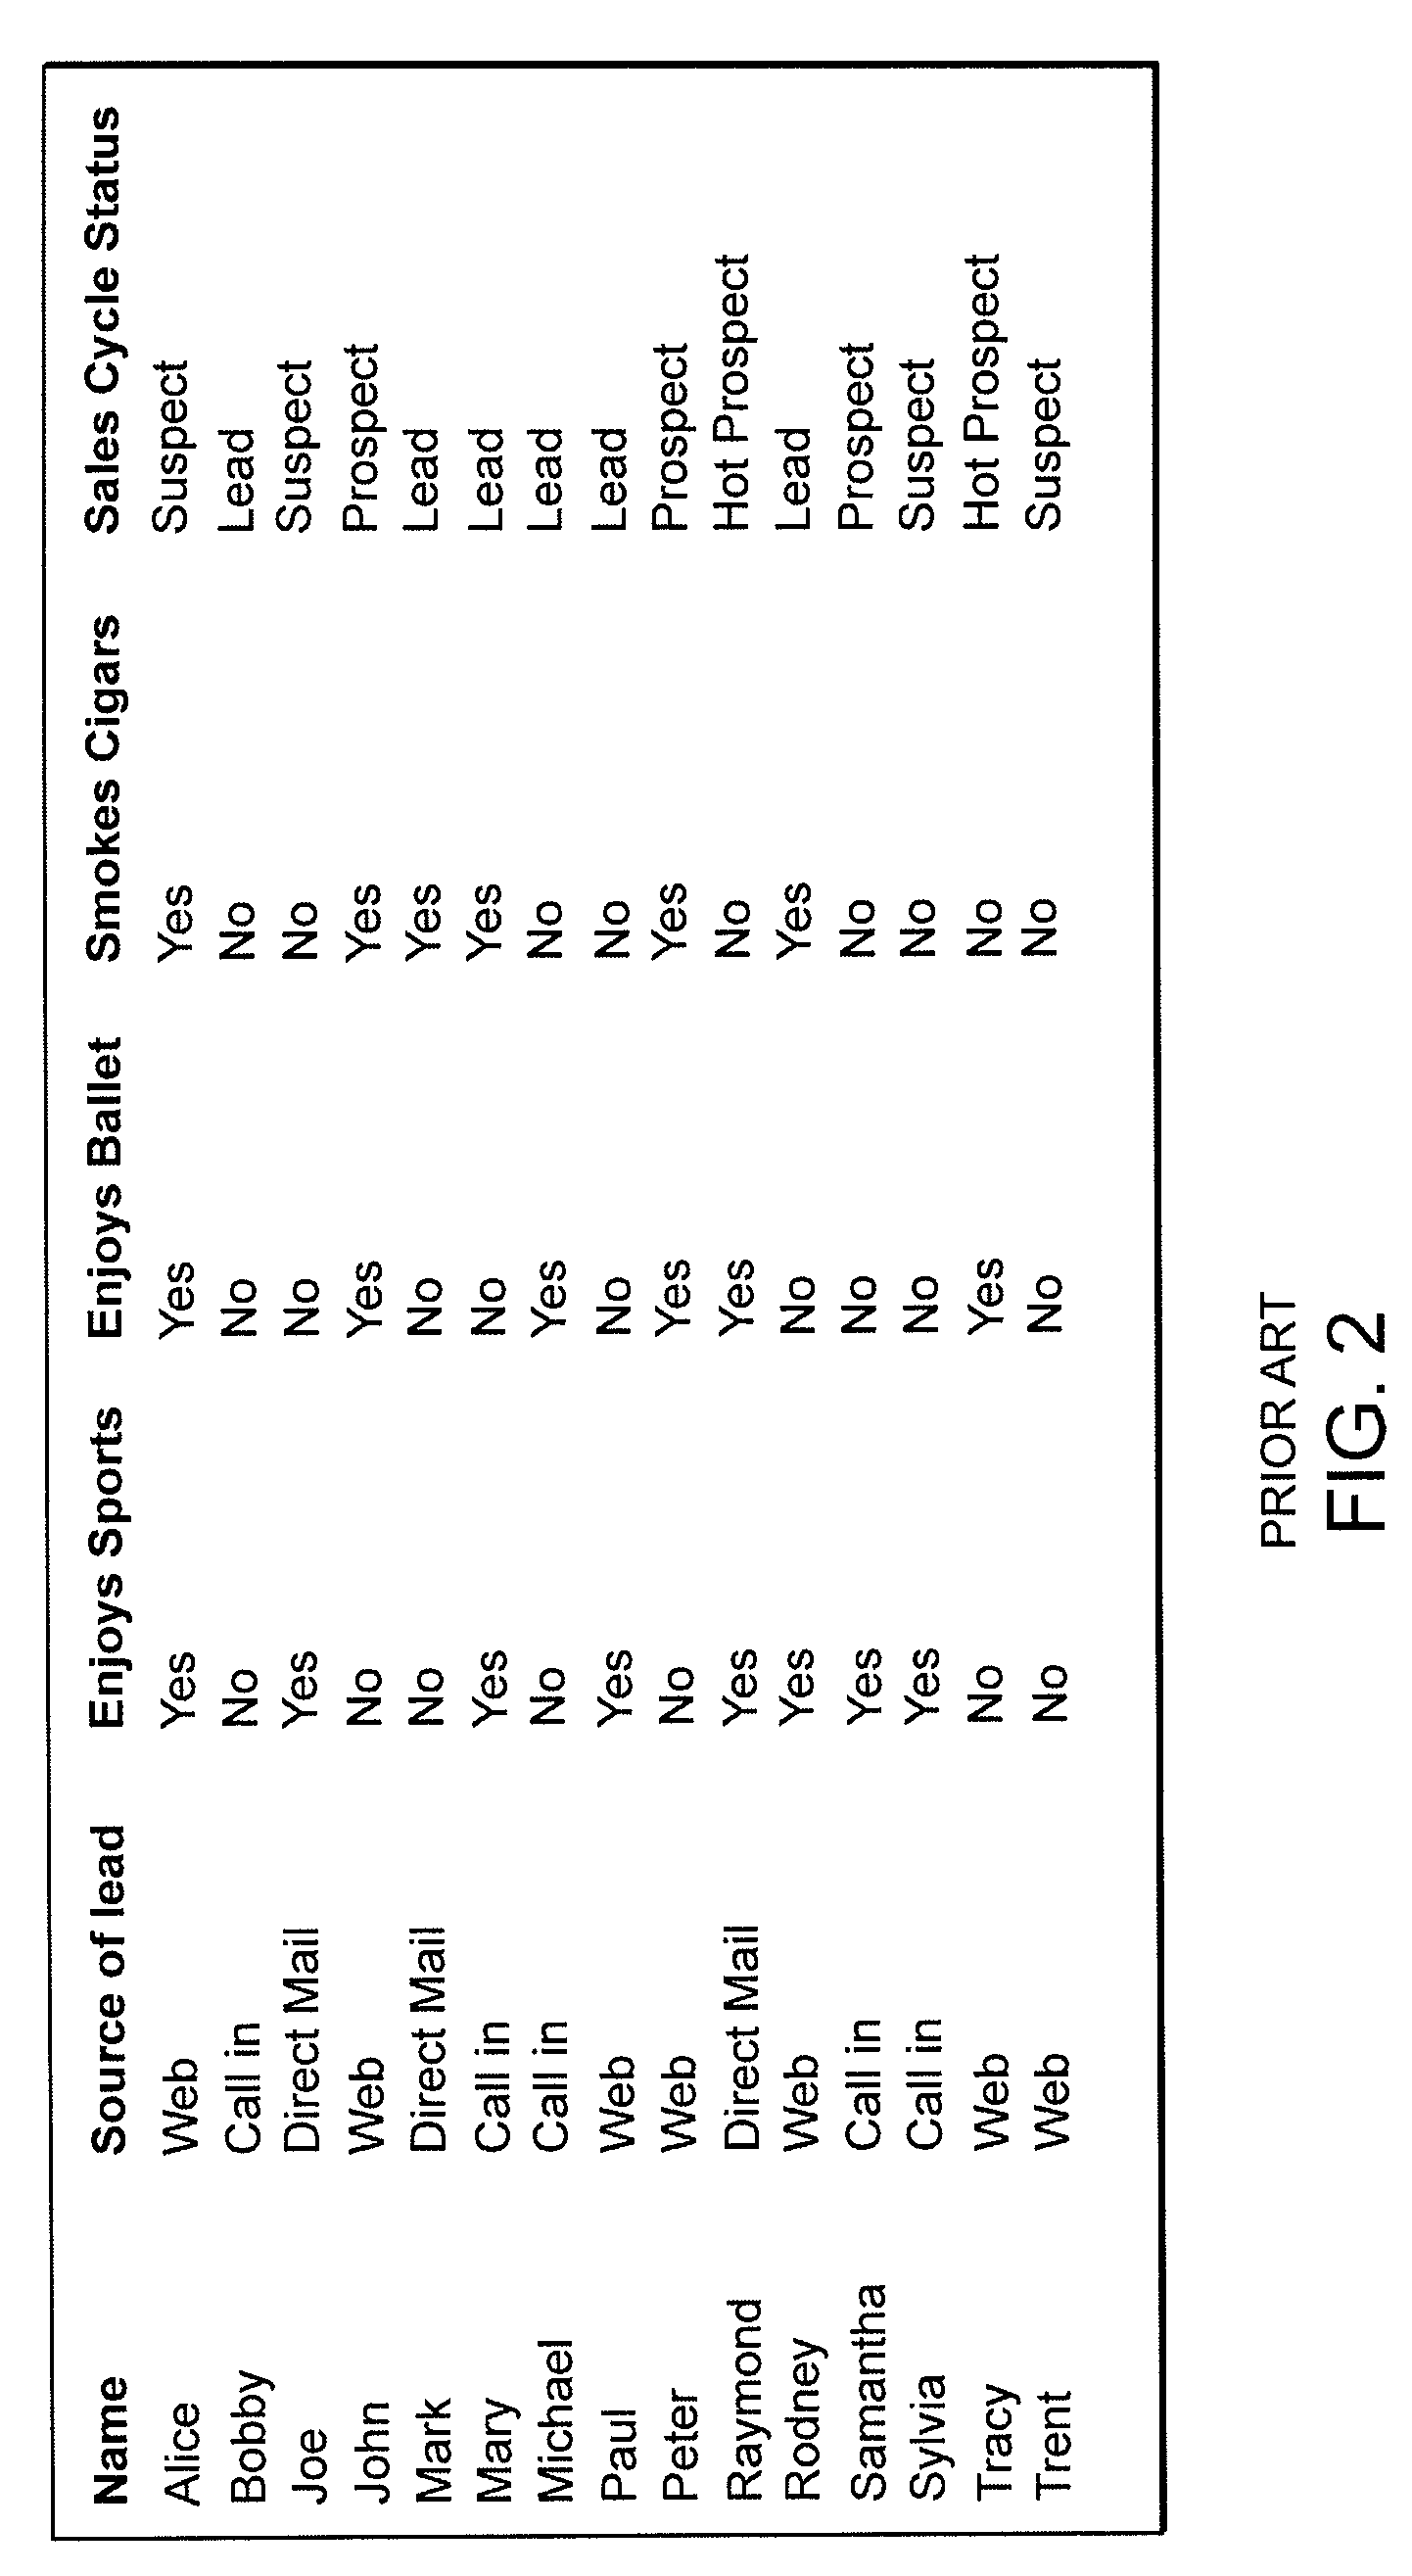 System and method for dynamic management of business processes